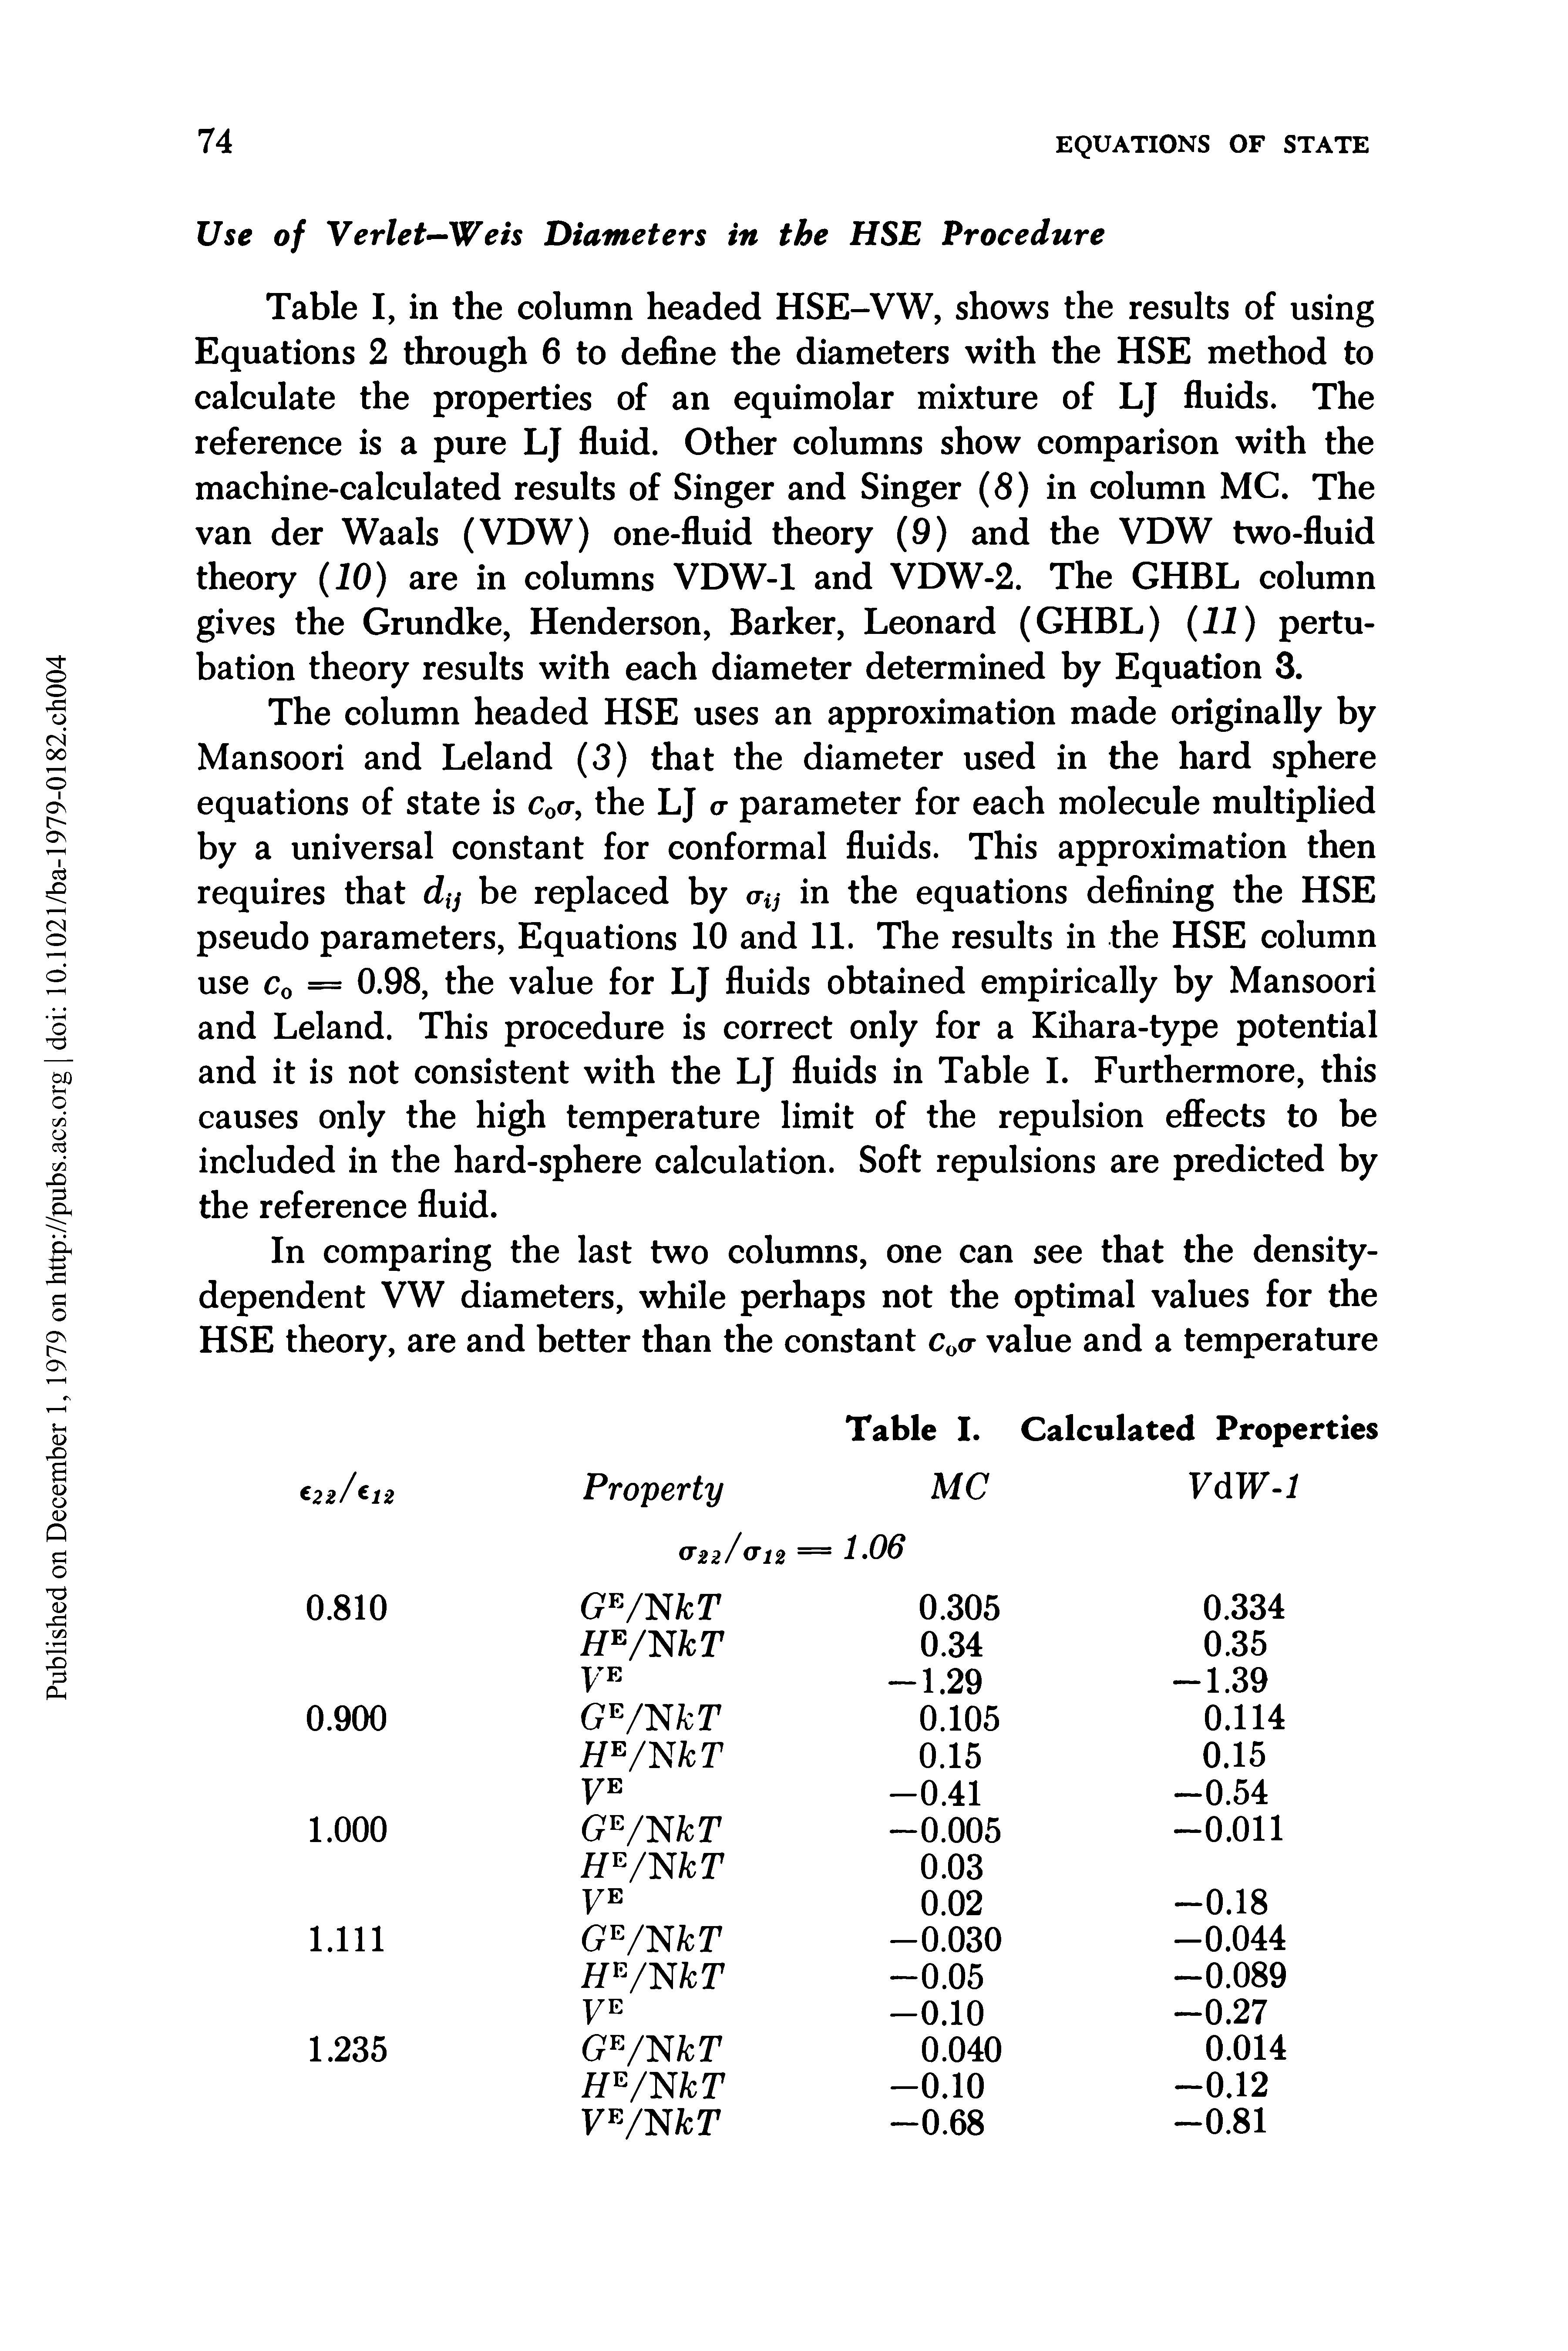 Table I, in the column headed HSE-VW, shows the results of using Equations 2 through 6 to define the diameters with the HSE method to calculate the properties of an equimolar mixture of LJ fluids. The reference is a pure LJ fluid. Other columns show comparison with the machine-calculated results of Singer and Singer (8) in column MC. The van der Waals (VDW) one-fluid theory (9) and the VDW two-fluid theory (10) are in columns VDW-1 and VDW-2. The GHBL column gives the Grundke, Henderson, Barker, Leonard (GHBL) (11) pertu-bation theory results with each diameter determined by Equation 3.